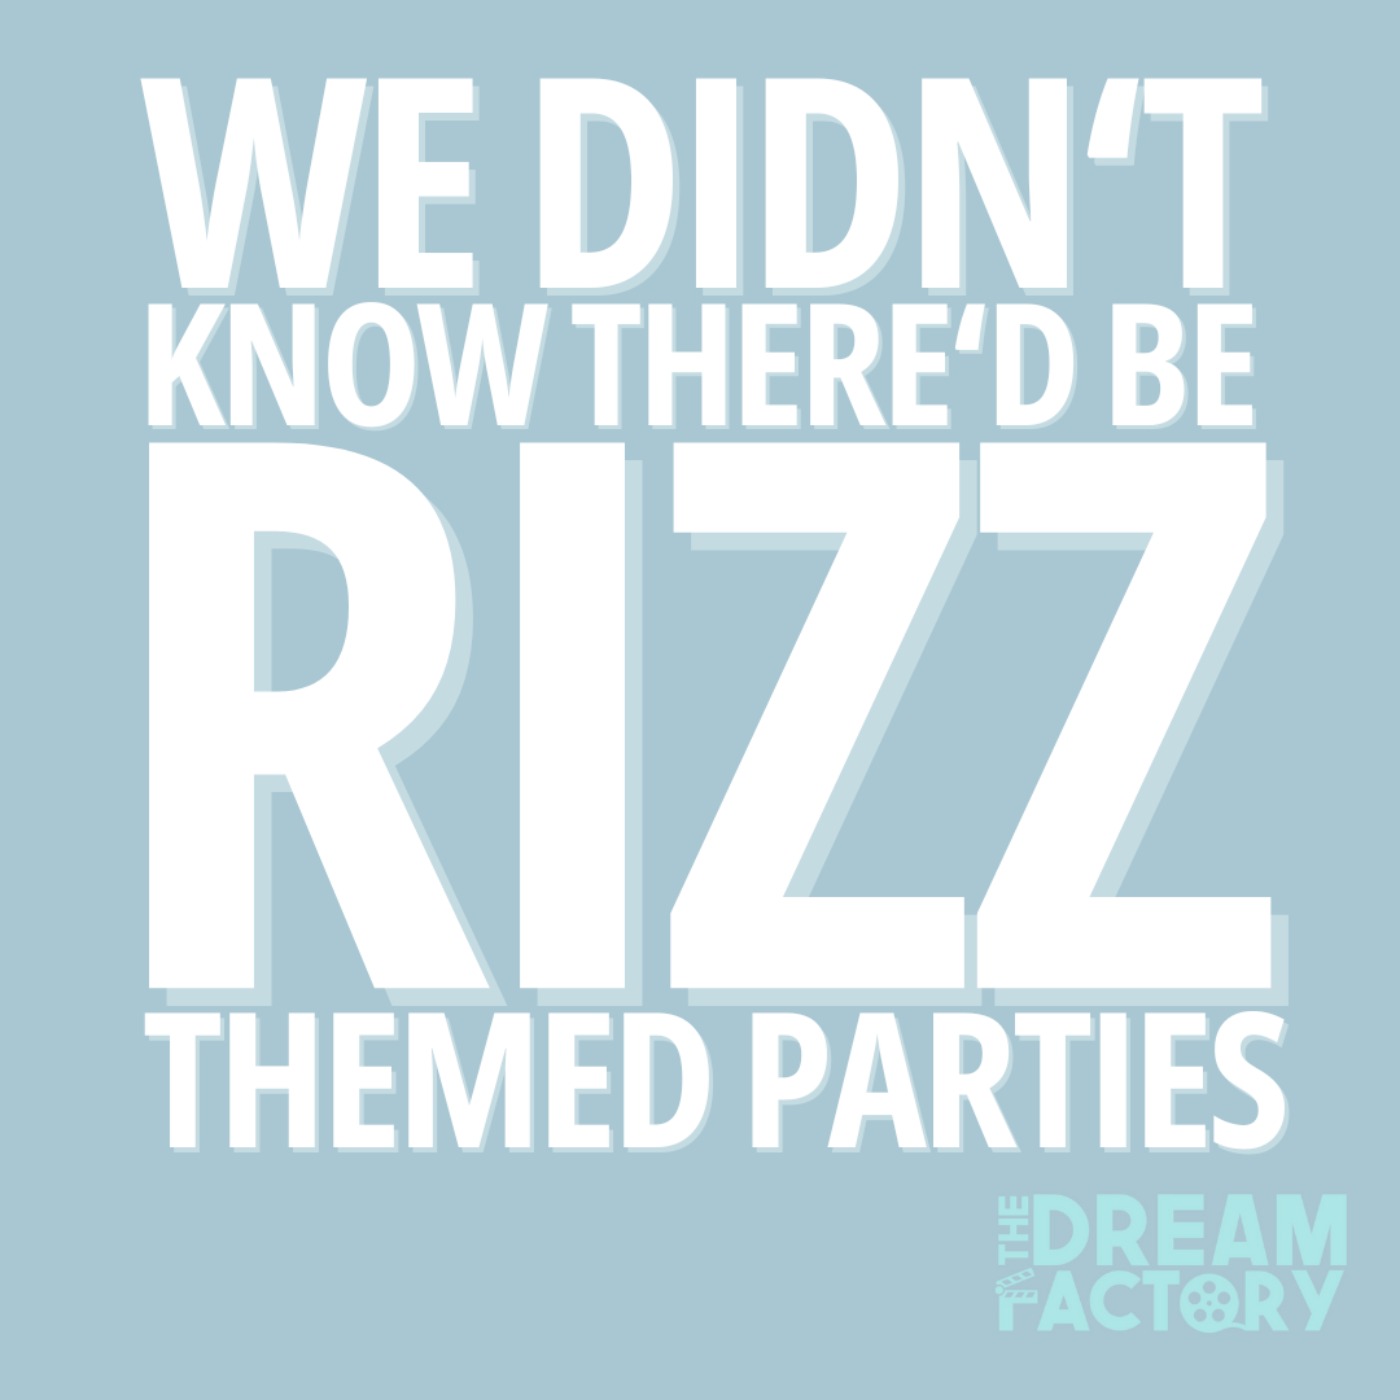 We Didn't Know There'd Be Themed Rizz Parties